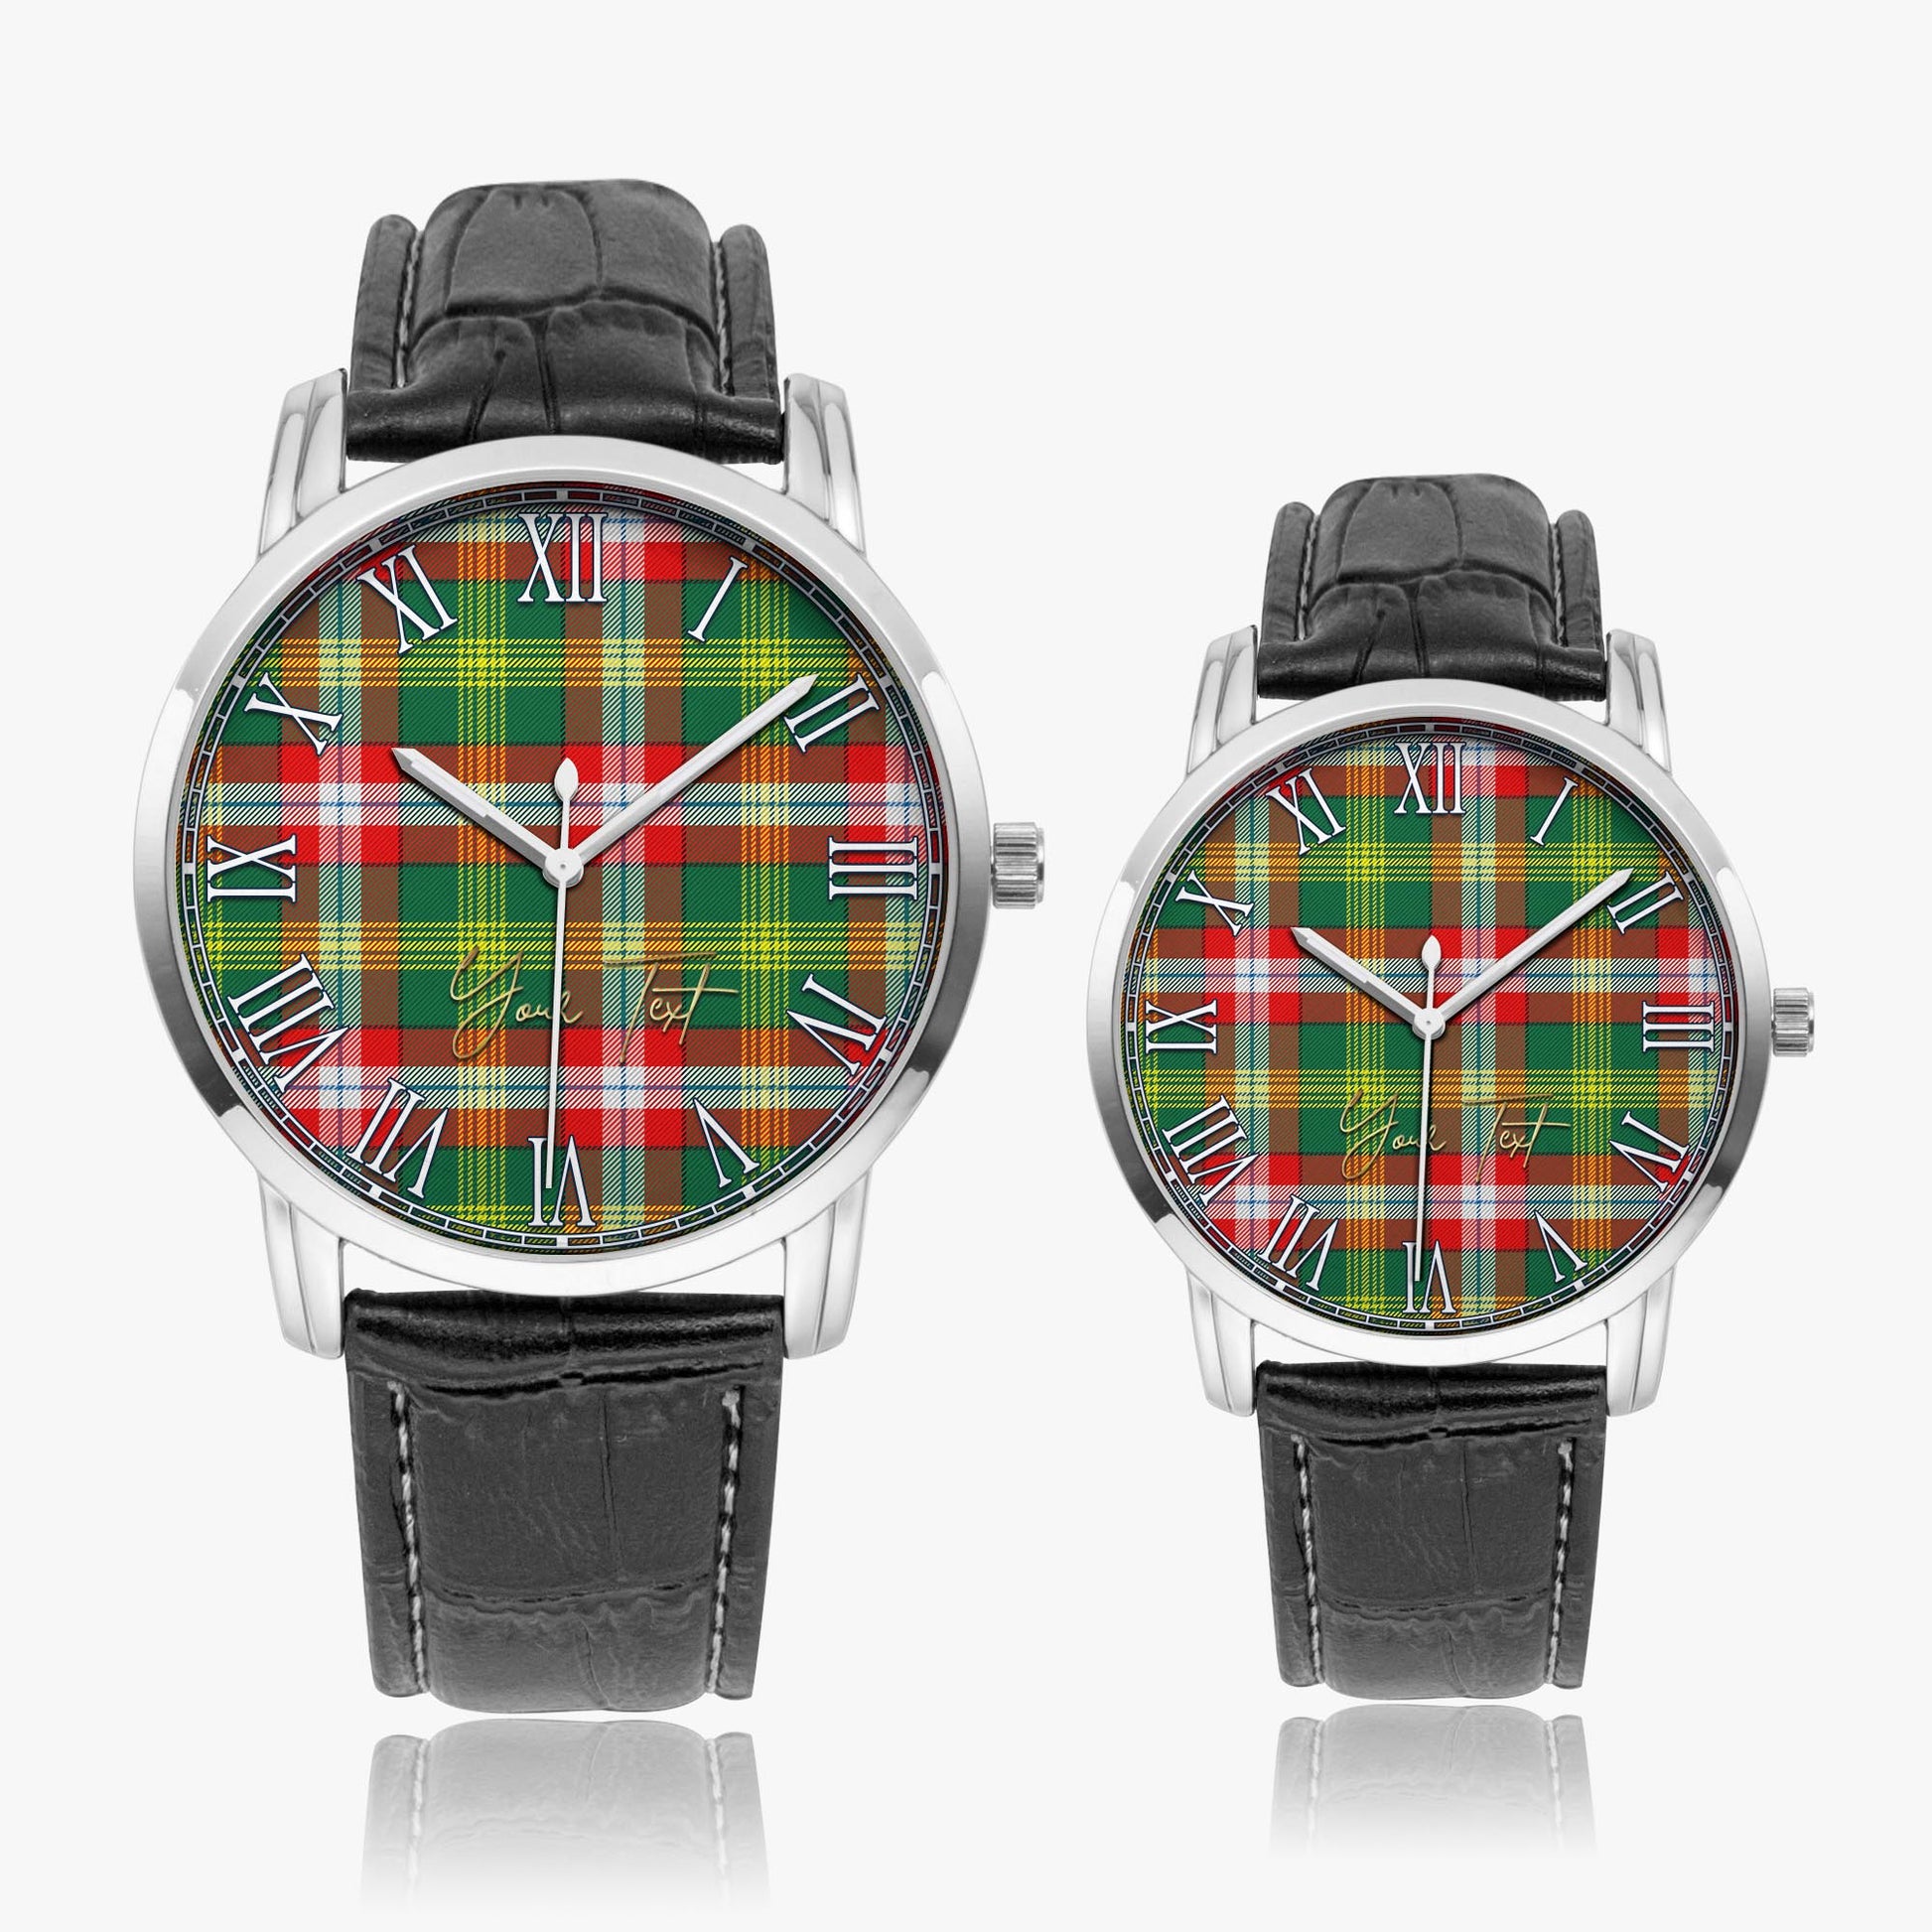 Northwest Territories Canada Tartan Personalized Your Text Leather Trap Quartz Watch Wide Type Silver Case With Black Leather Strap - Tartanvibesclothing